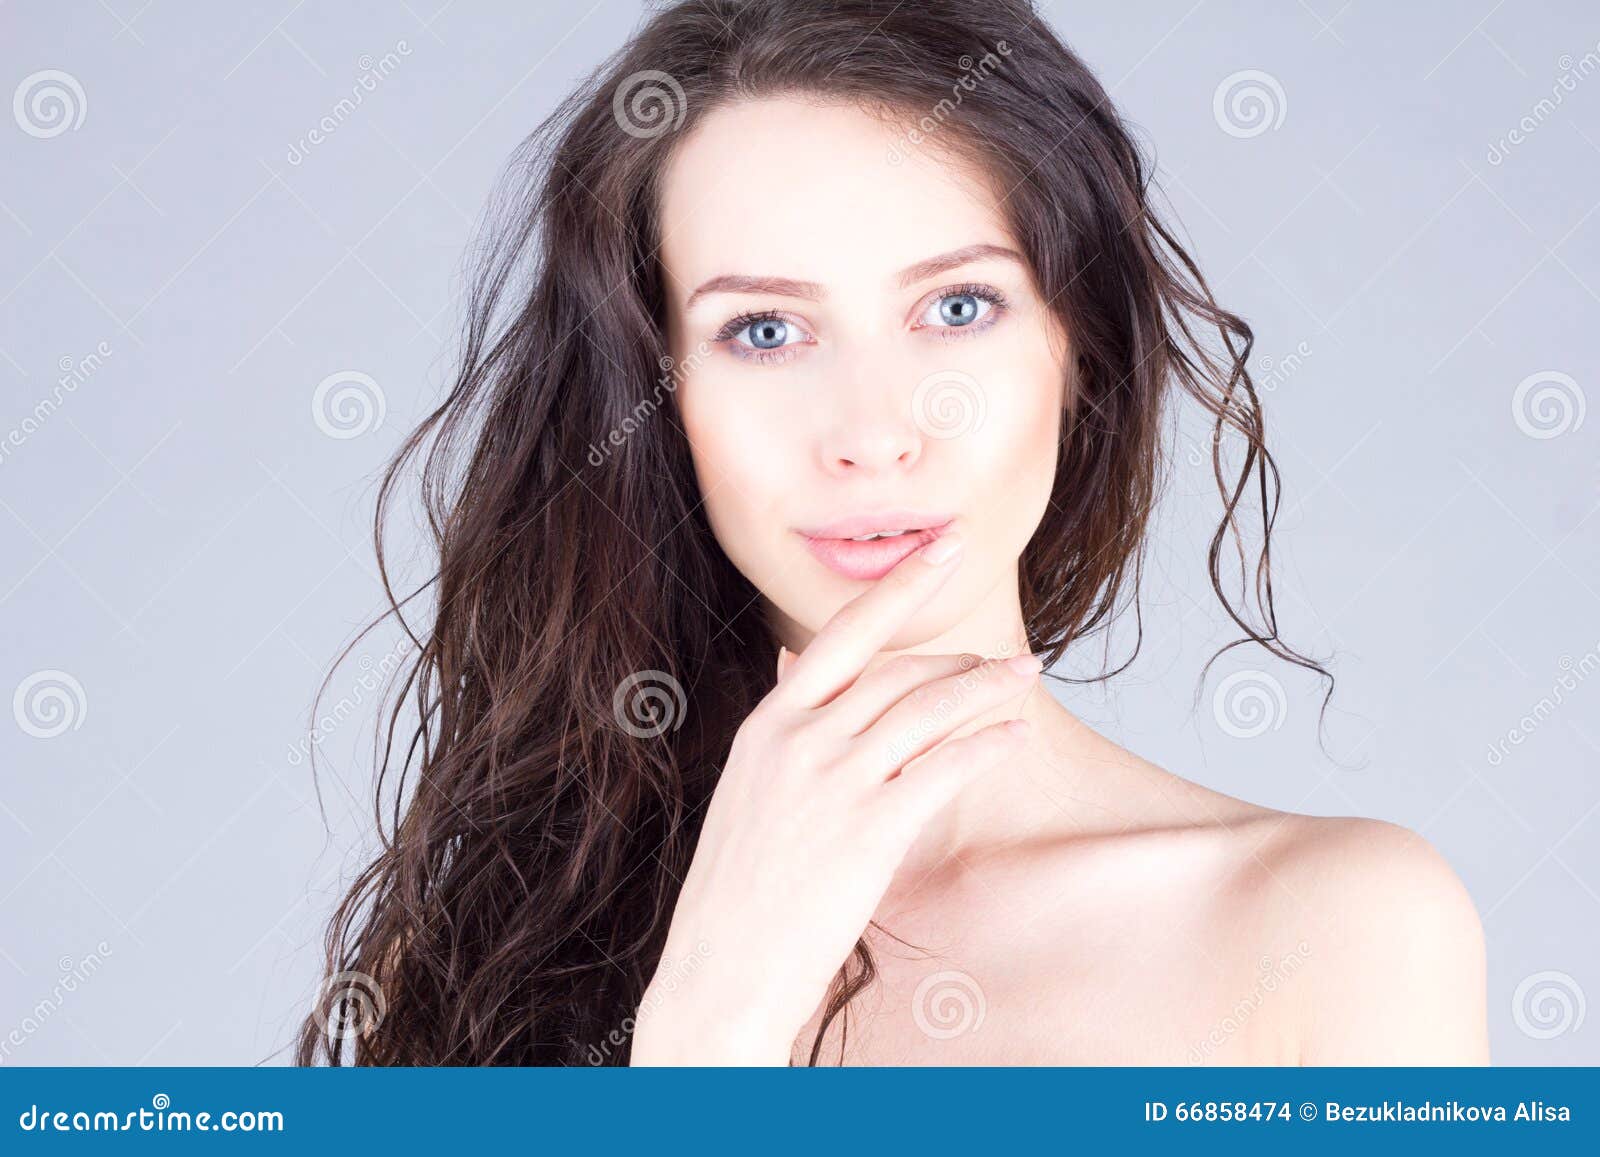 Beauty Portrait with Blue Eyes and Curly Hair - wide 7